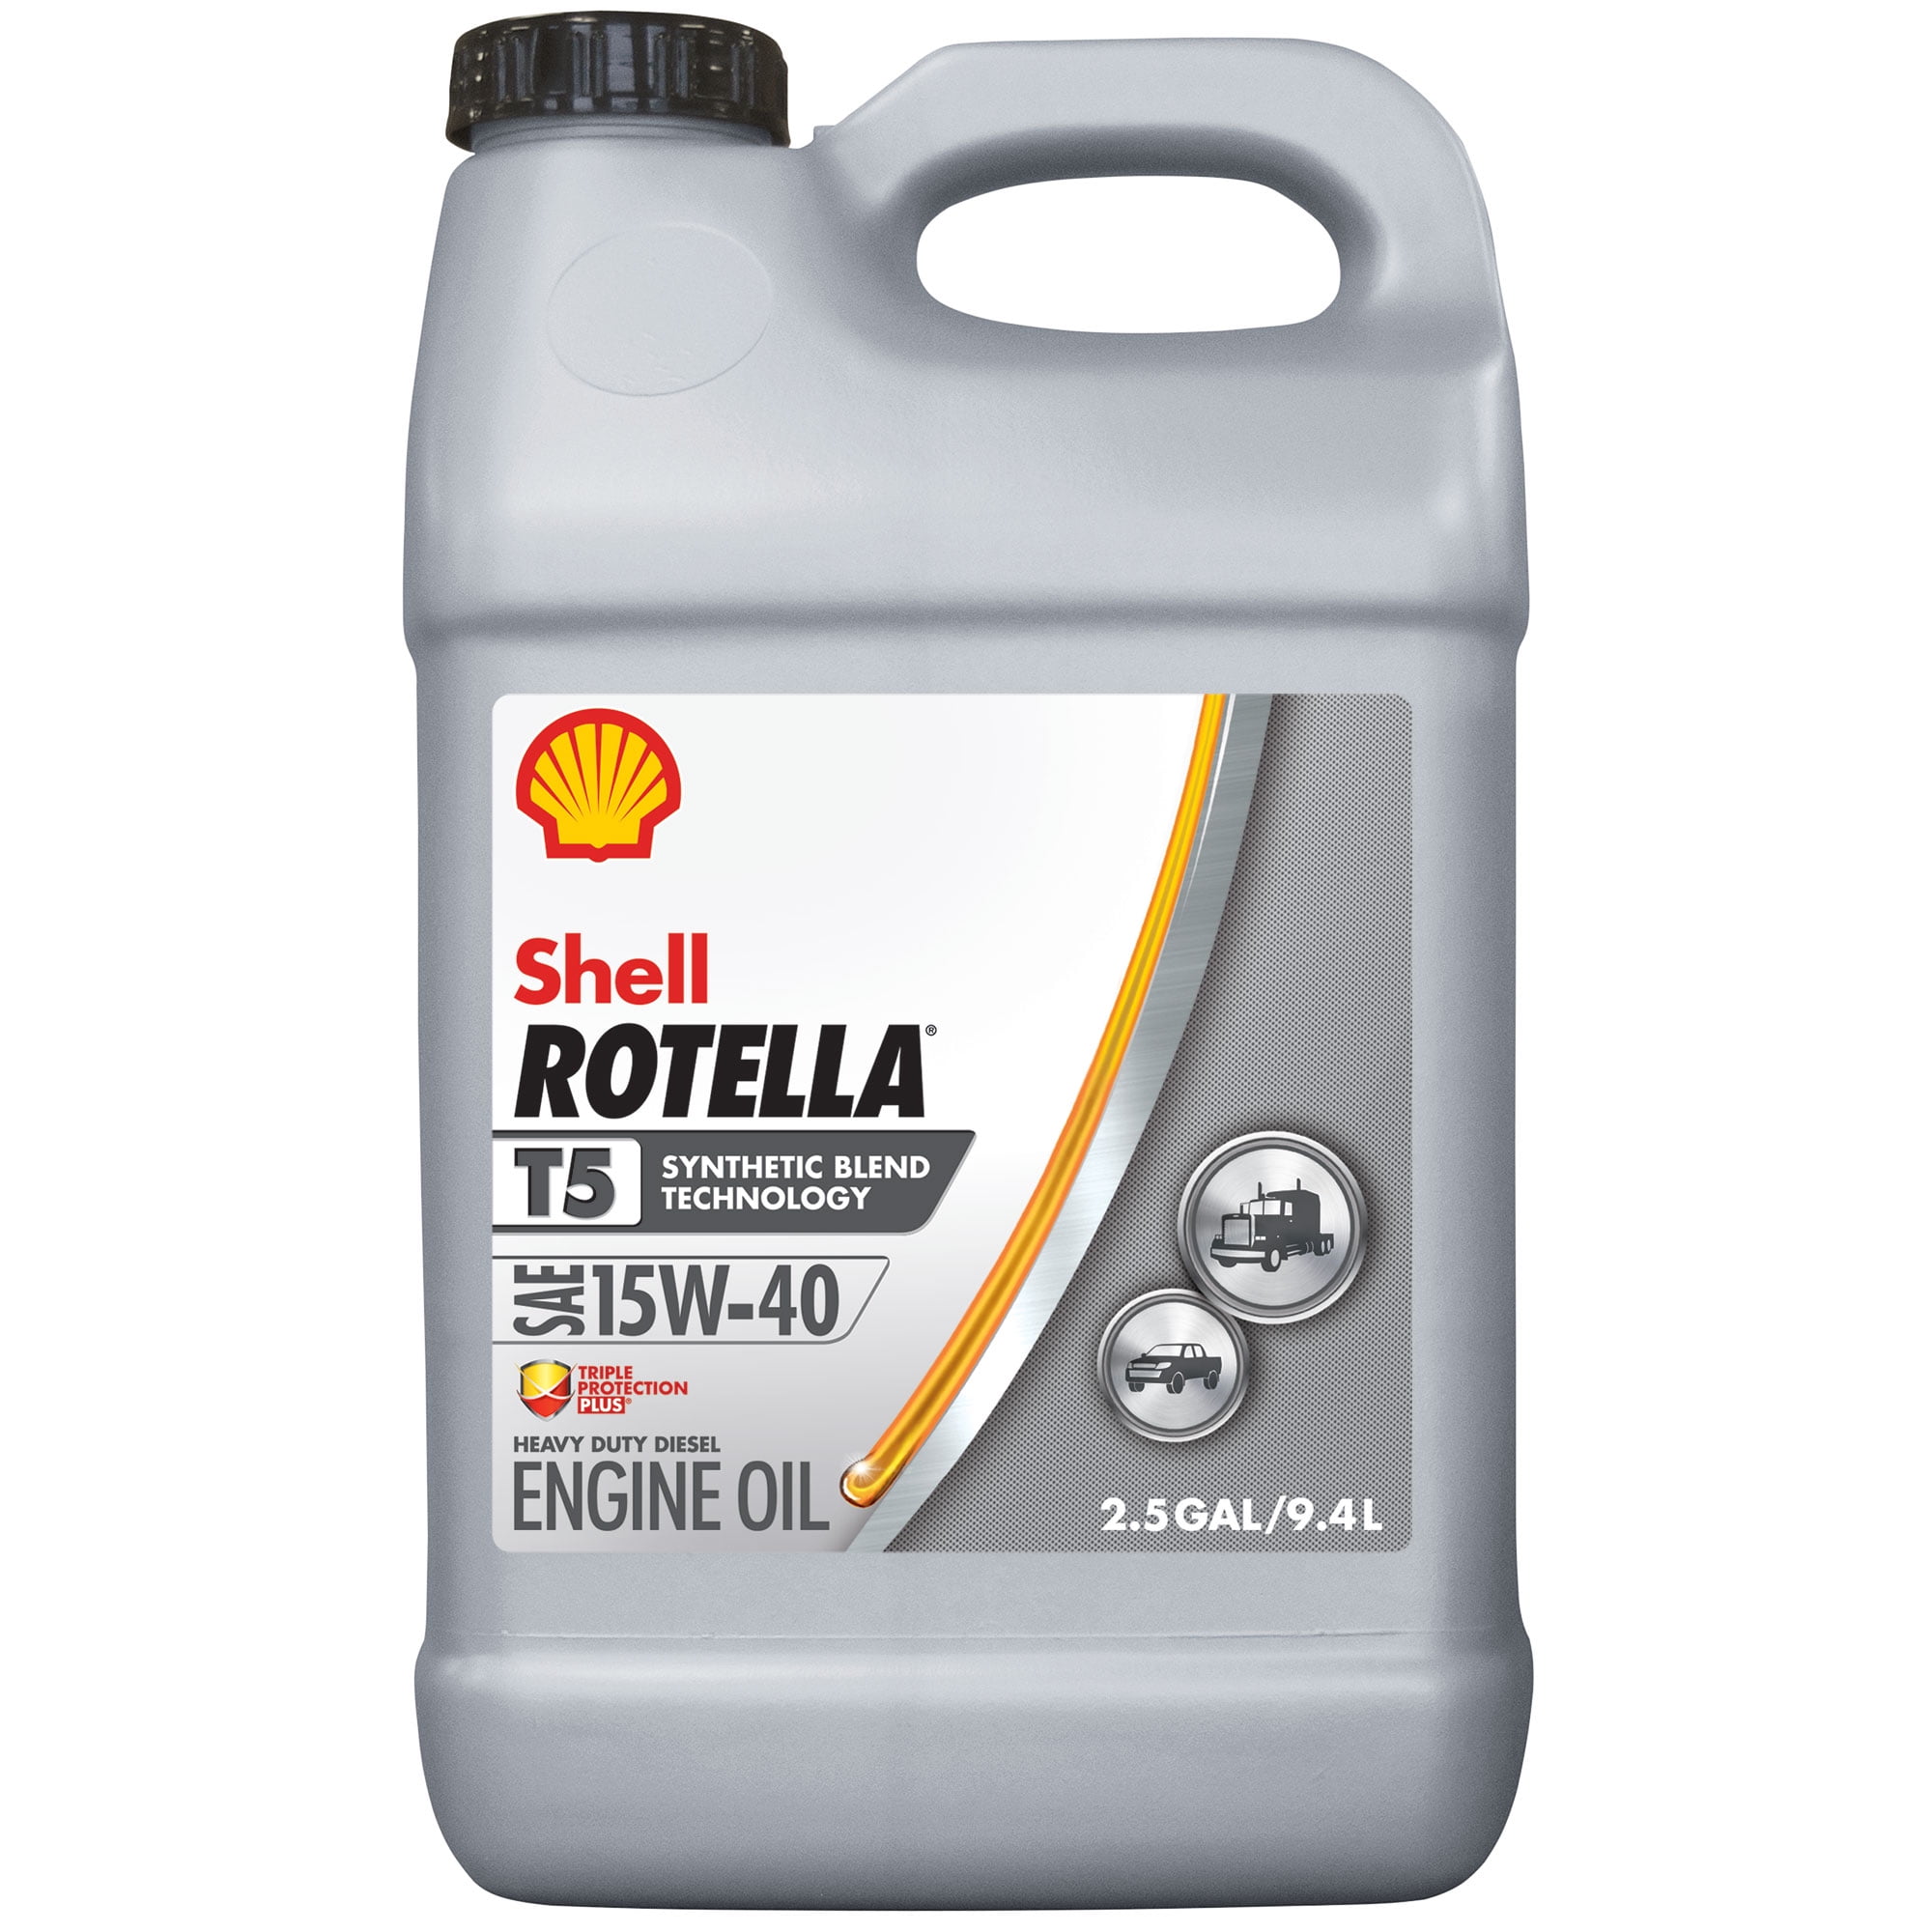 shell-rotella-t5-synthetic-blend-15w-40-diesel-engine-oil-2-5-gallon